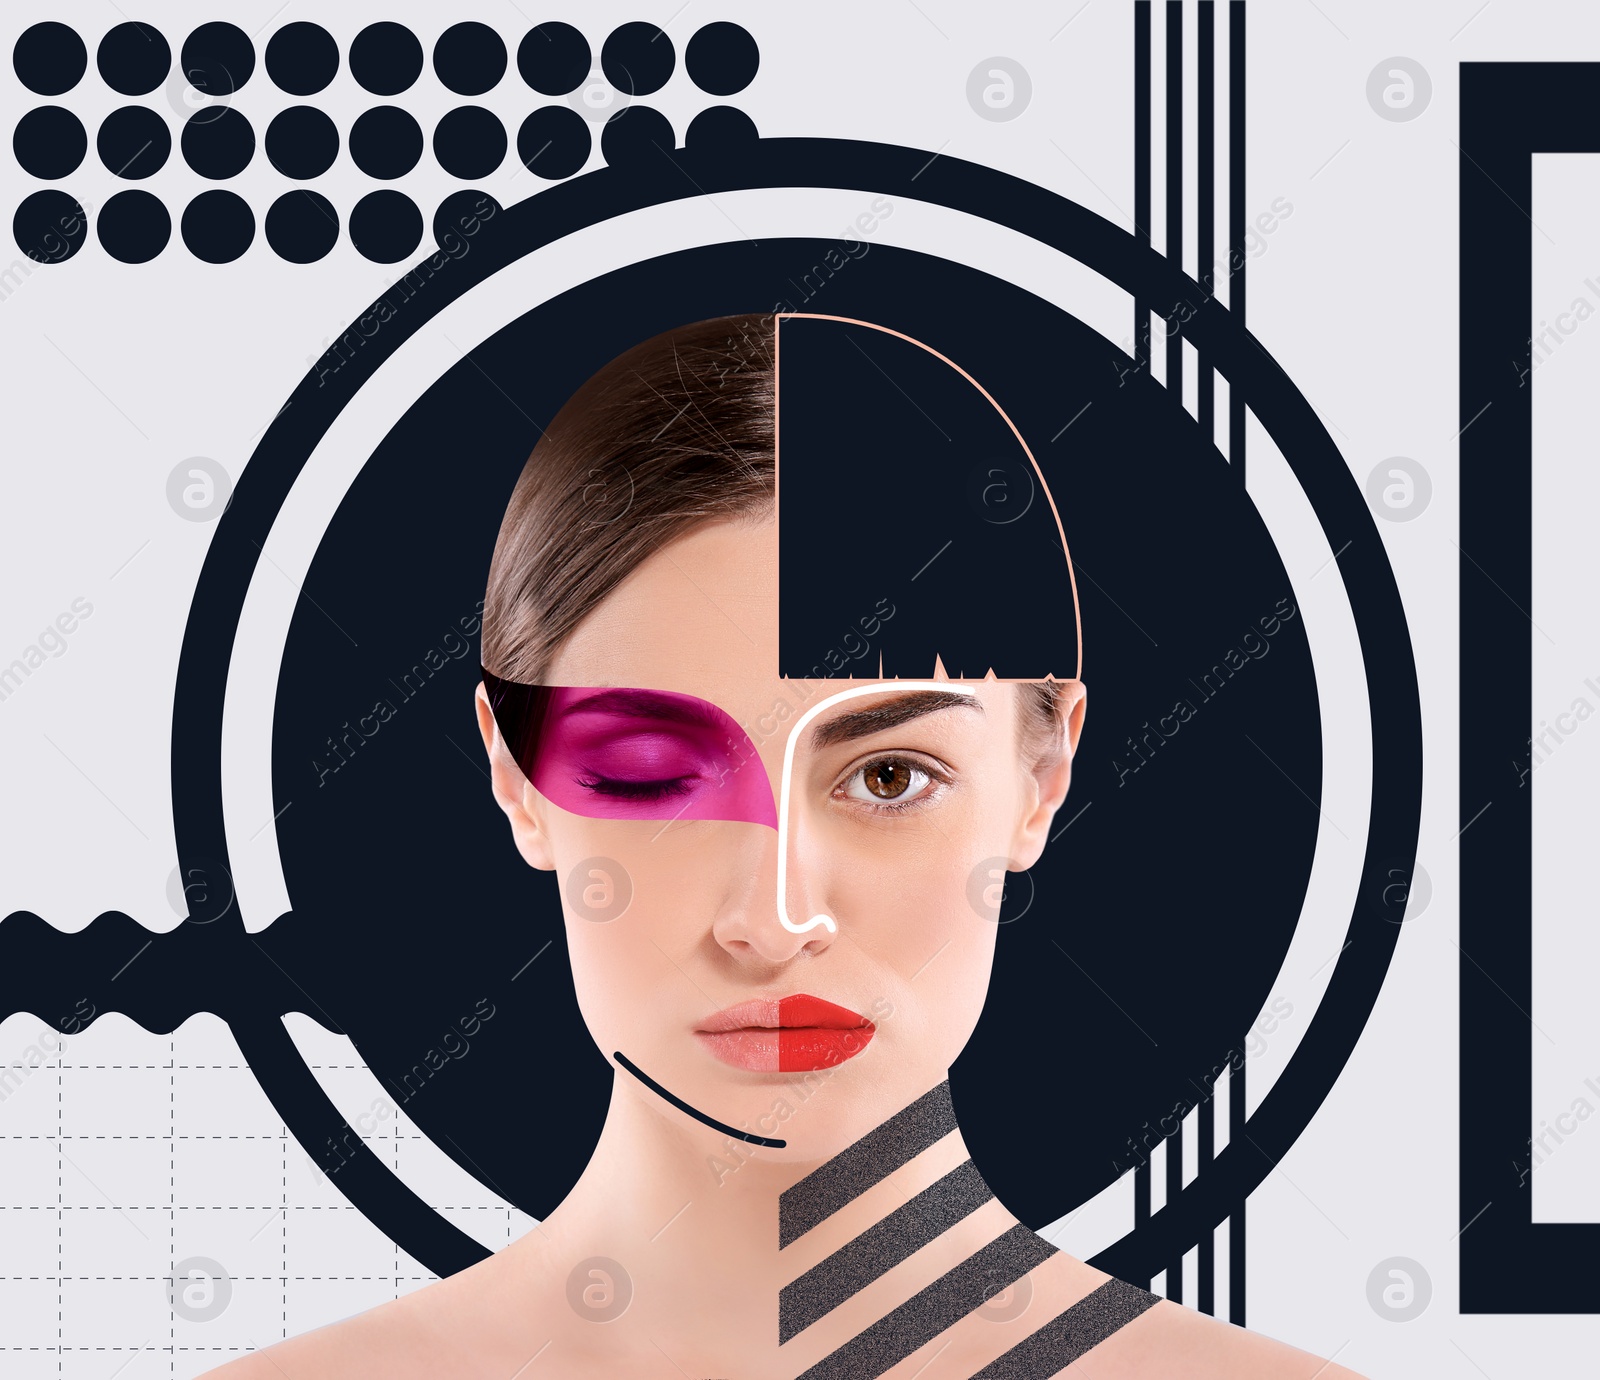 Image of Stylish artwork. Face photo pieces and geometric figures combined into creative portrait of beautiful woman